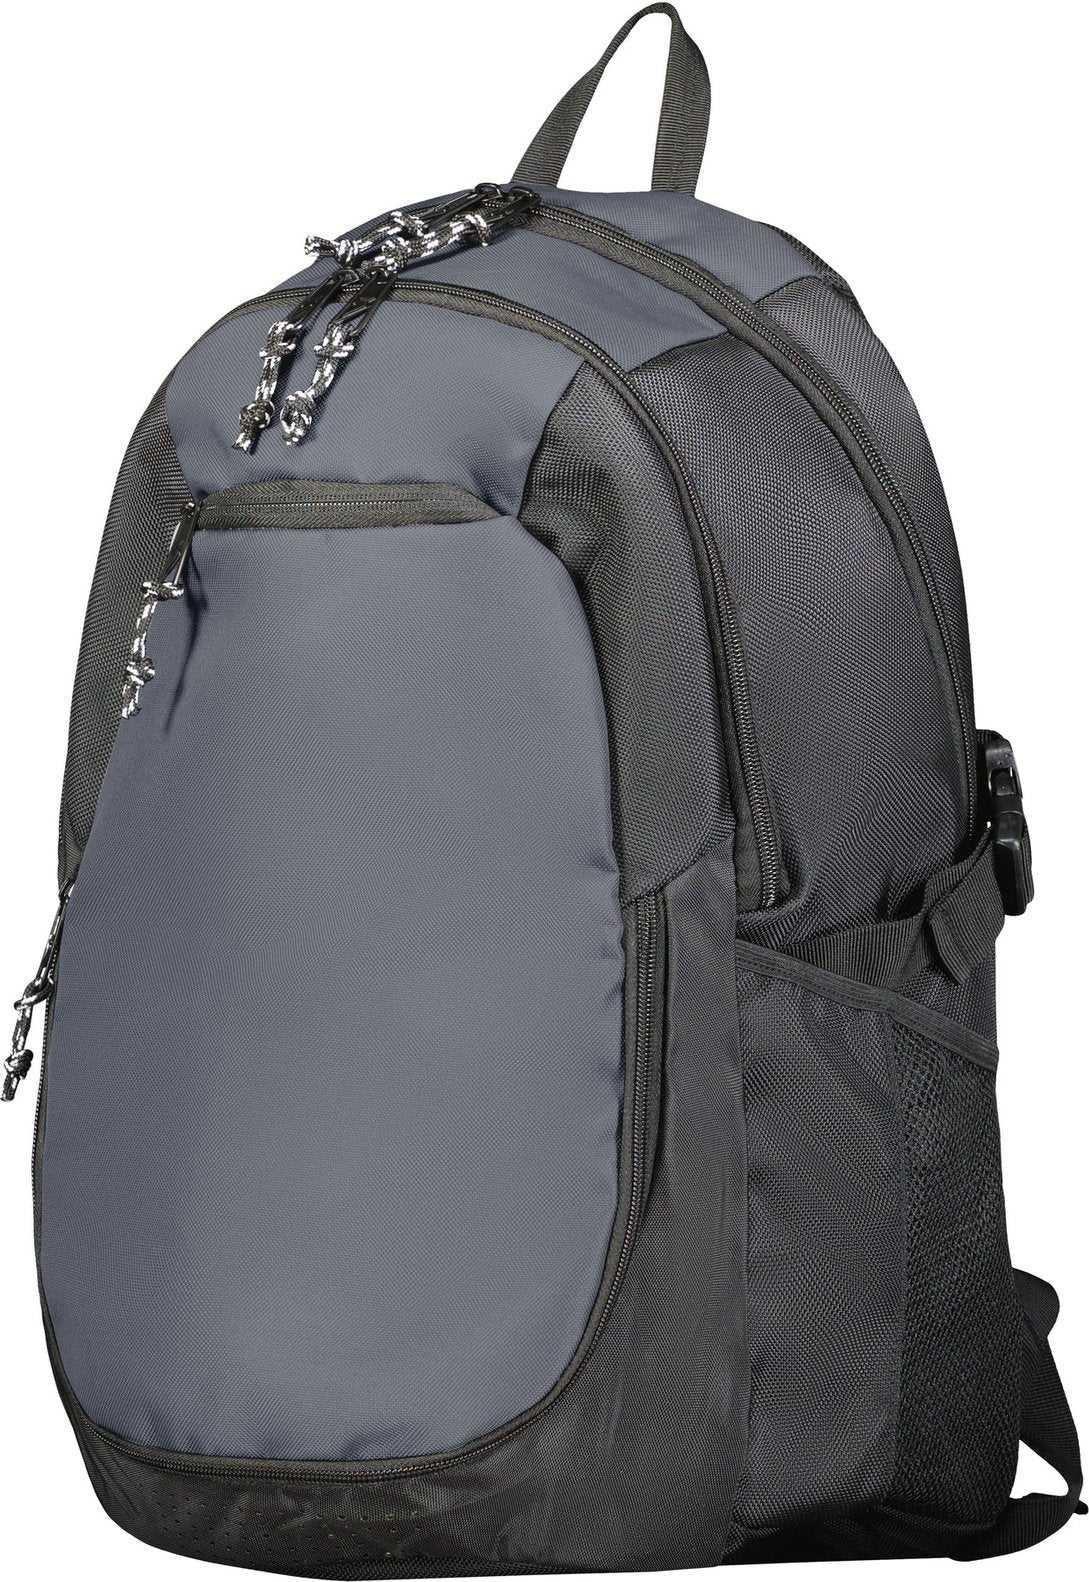 High Five 327930 United Backpack - Graphite Black - HIT a Double